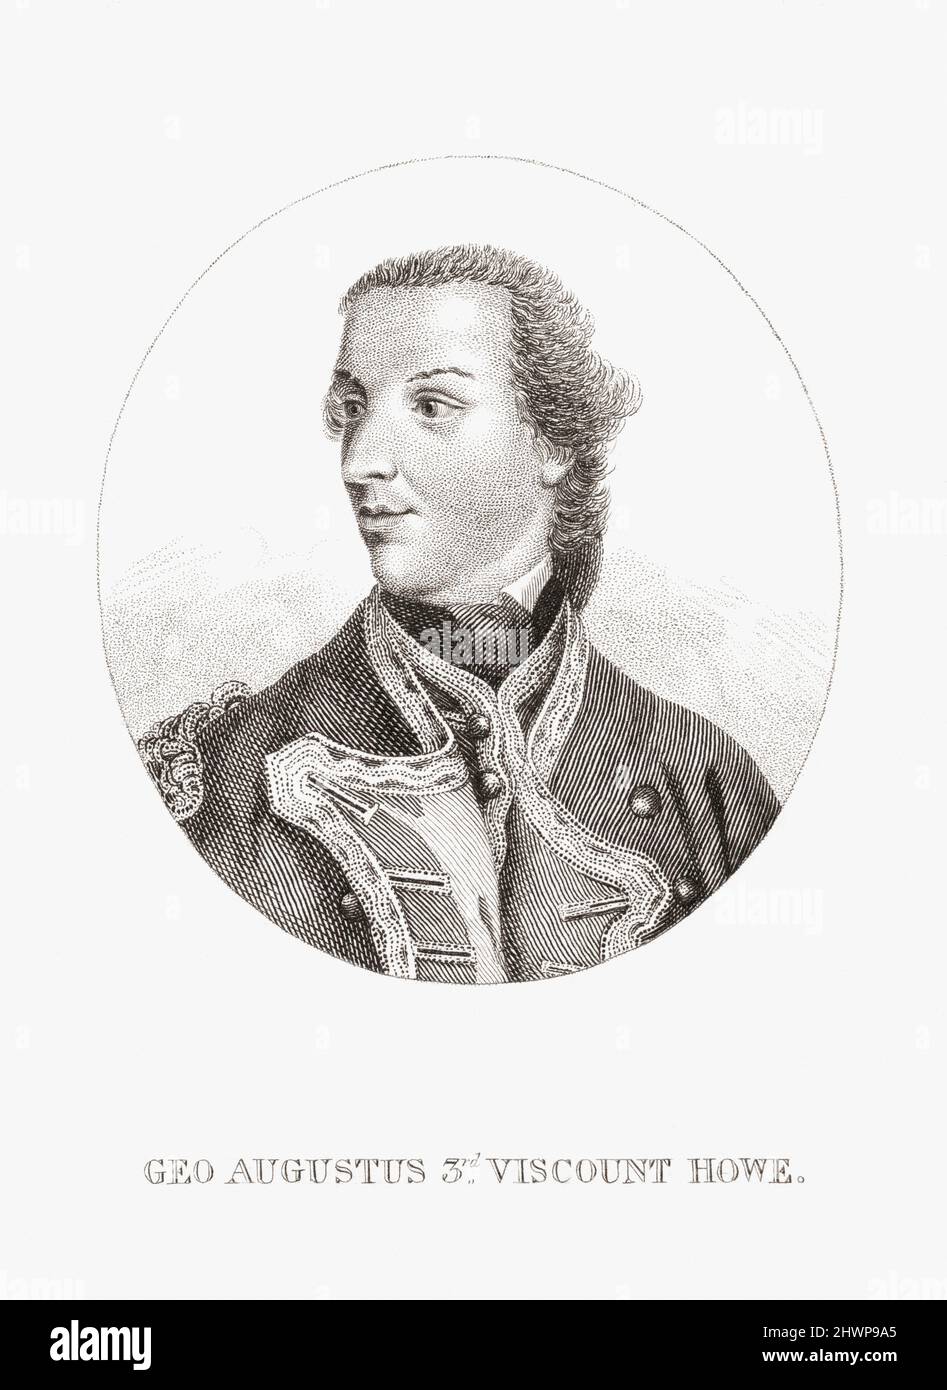 George Augustus Howe, 3rd Viscount Howe, c. 1725 – 1758.  Brigadier General in the British Army.   He was considered amongst the best officers in the army.  He was killed during a skirmish with the French during the Seven Years War.  After a contemporary portrait by an unidentified artist. Stock Photo